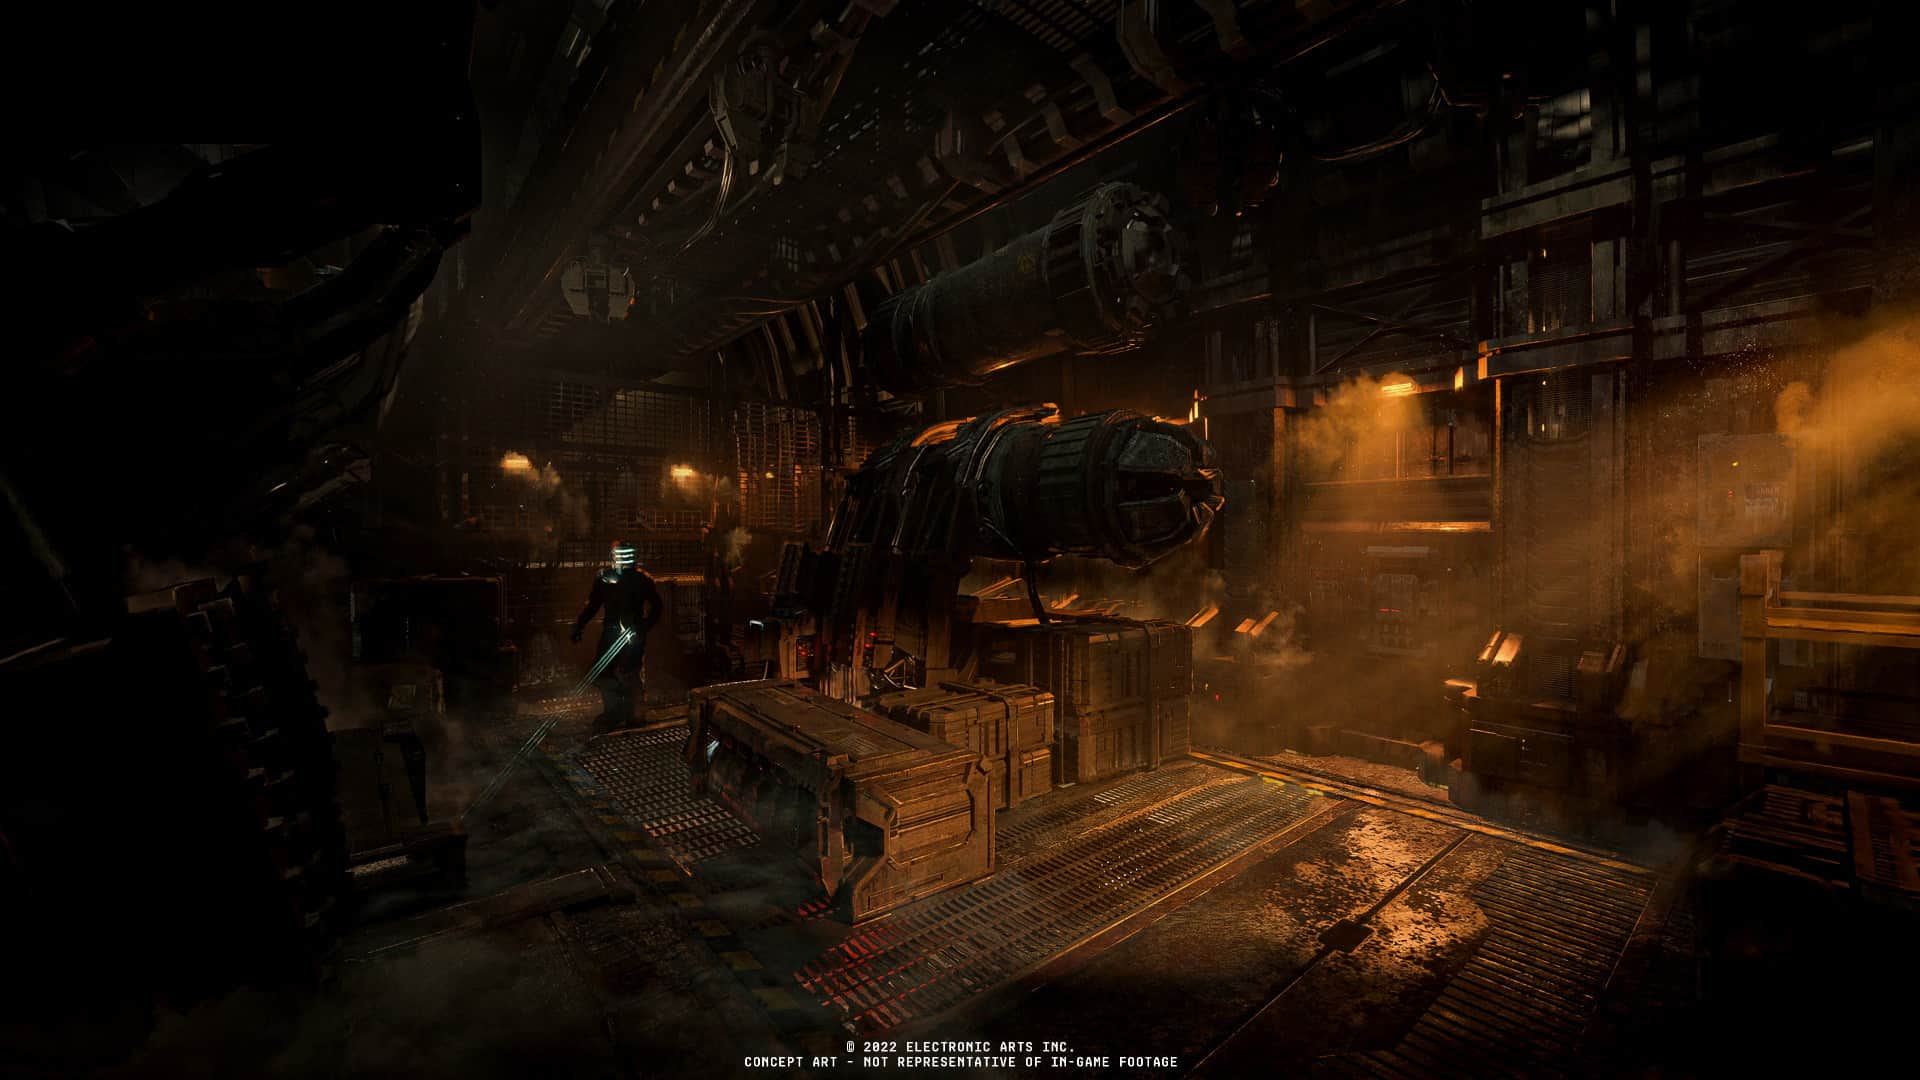 Dead Space' Remake: How the New Game Has Been Updated for Next-Gen